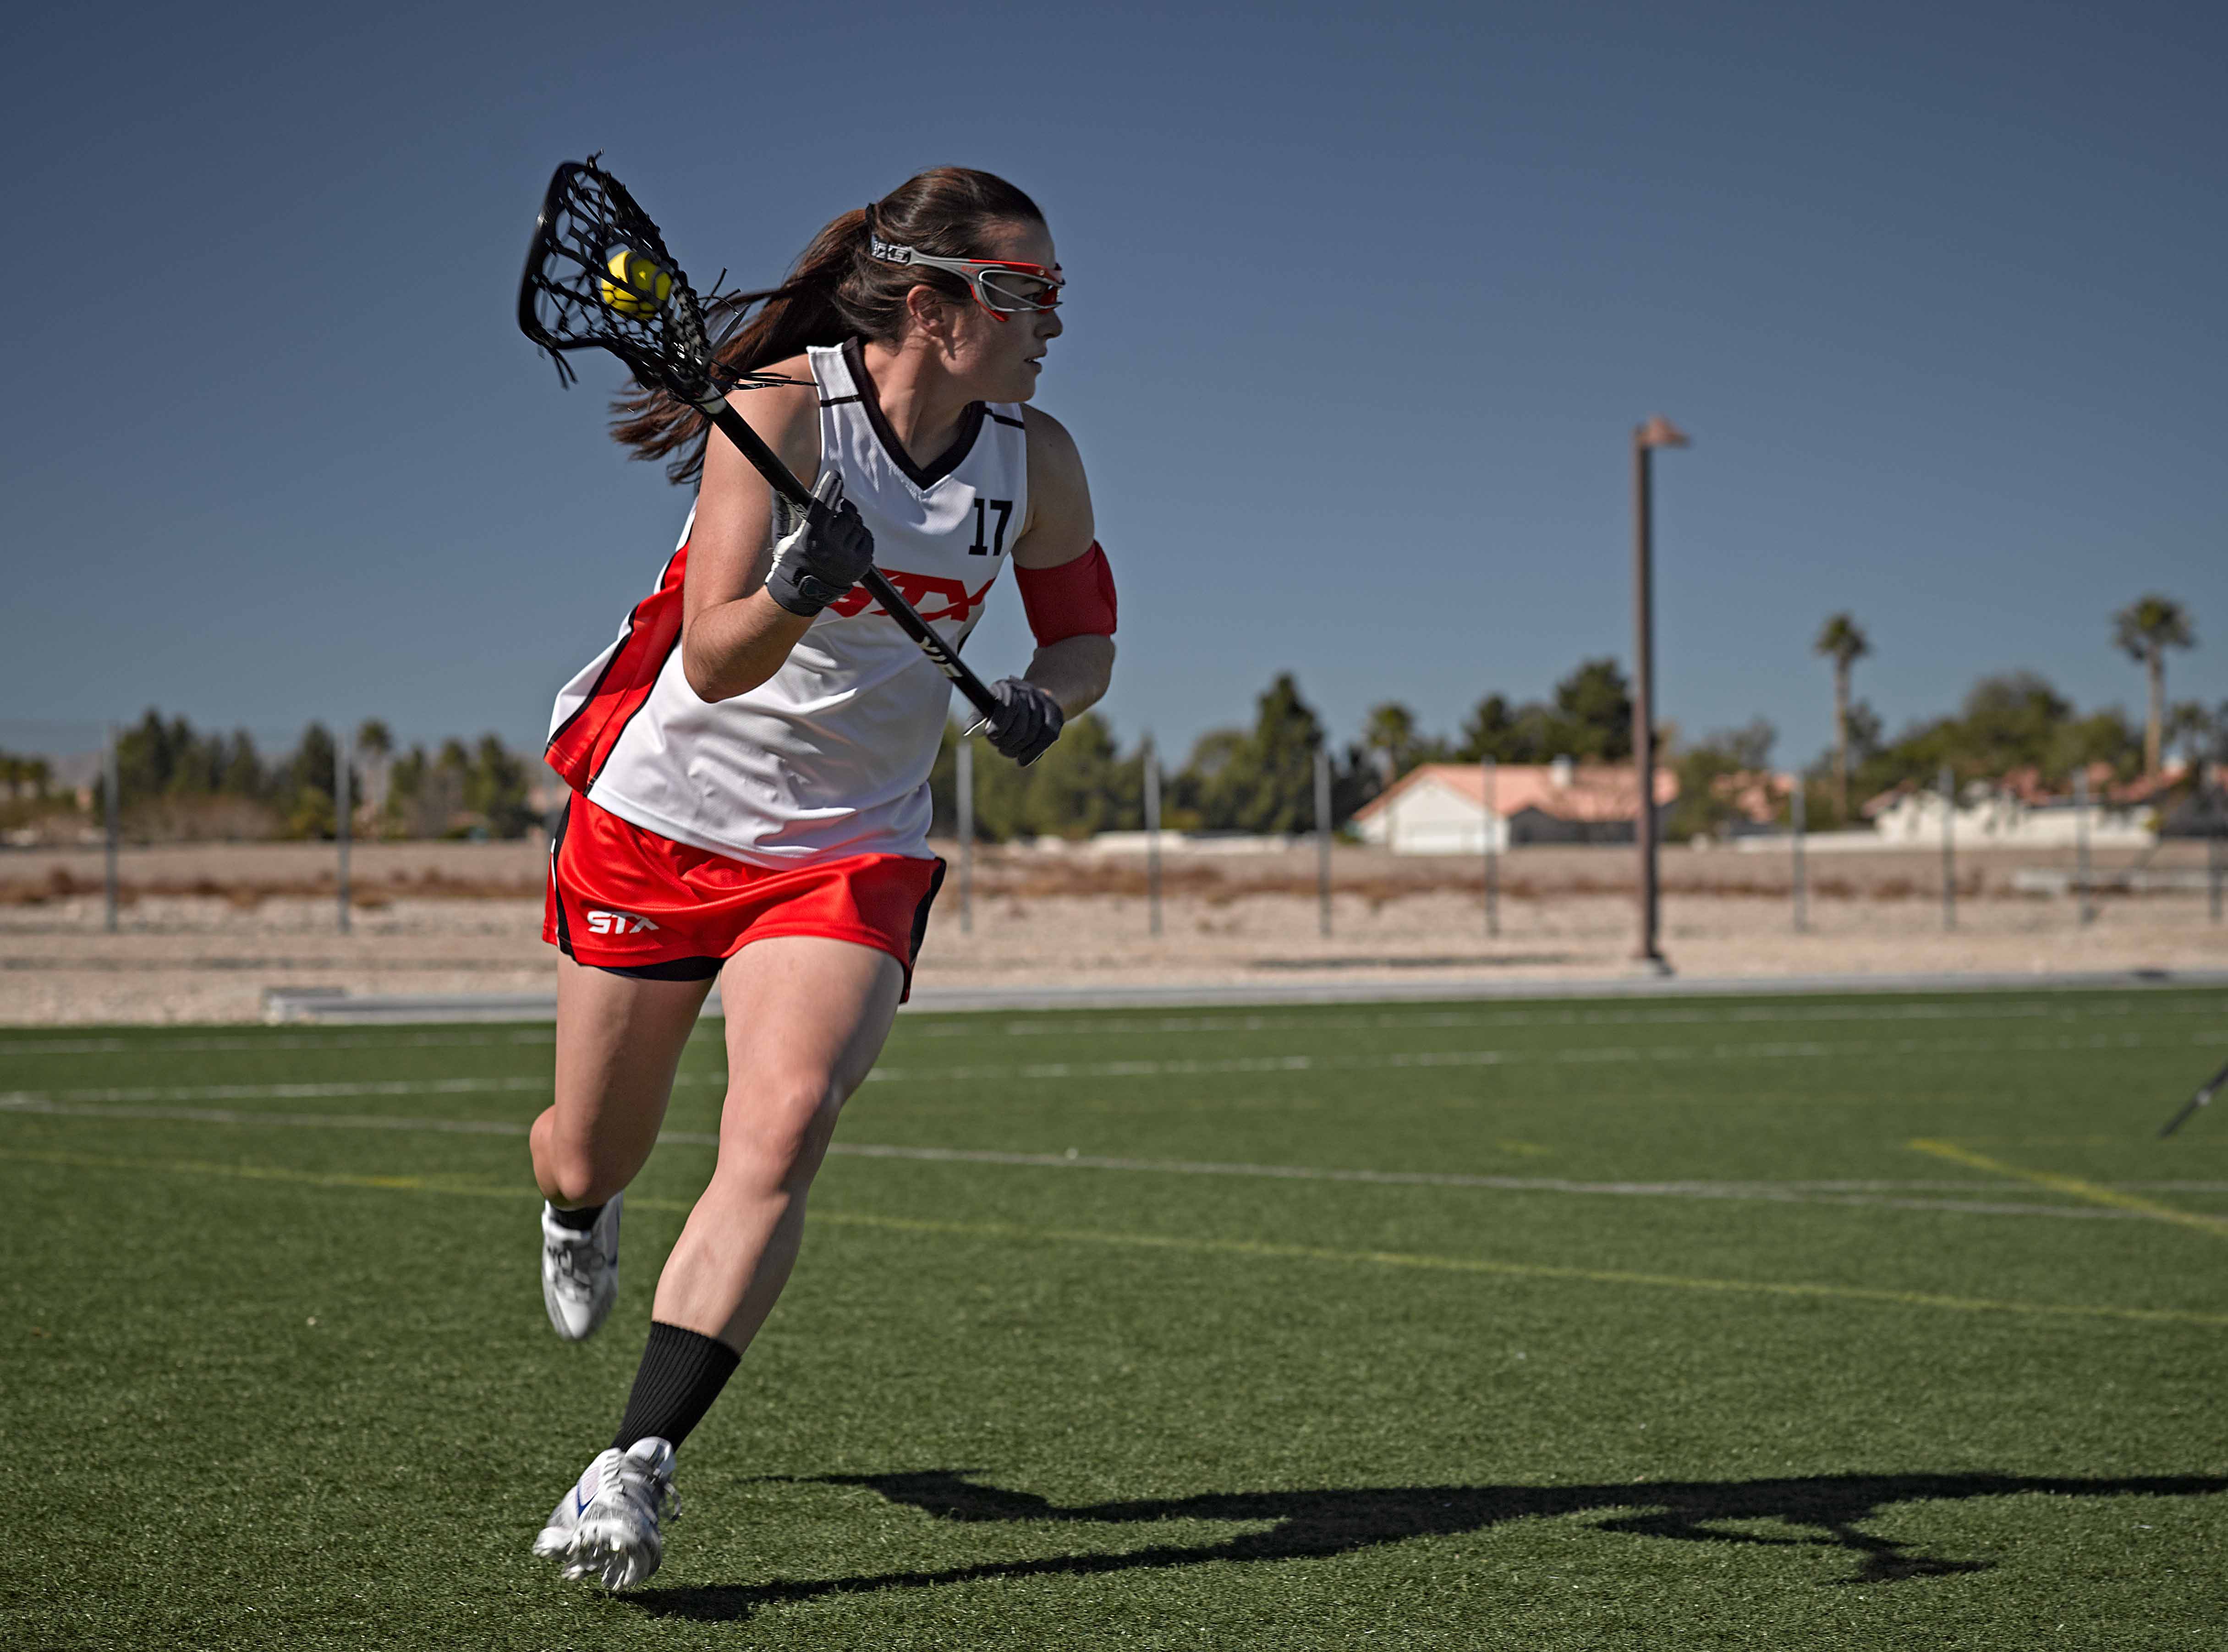 Team STX athletes, including Taylor D’Amore  will will host two girls lacrosse camps.